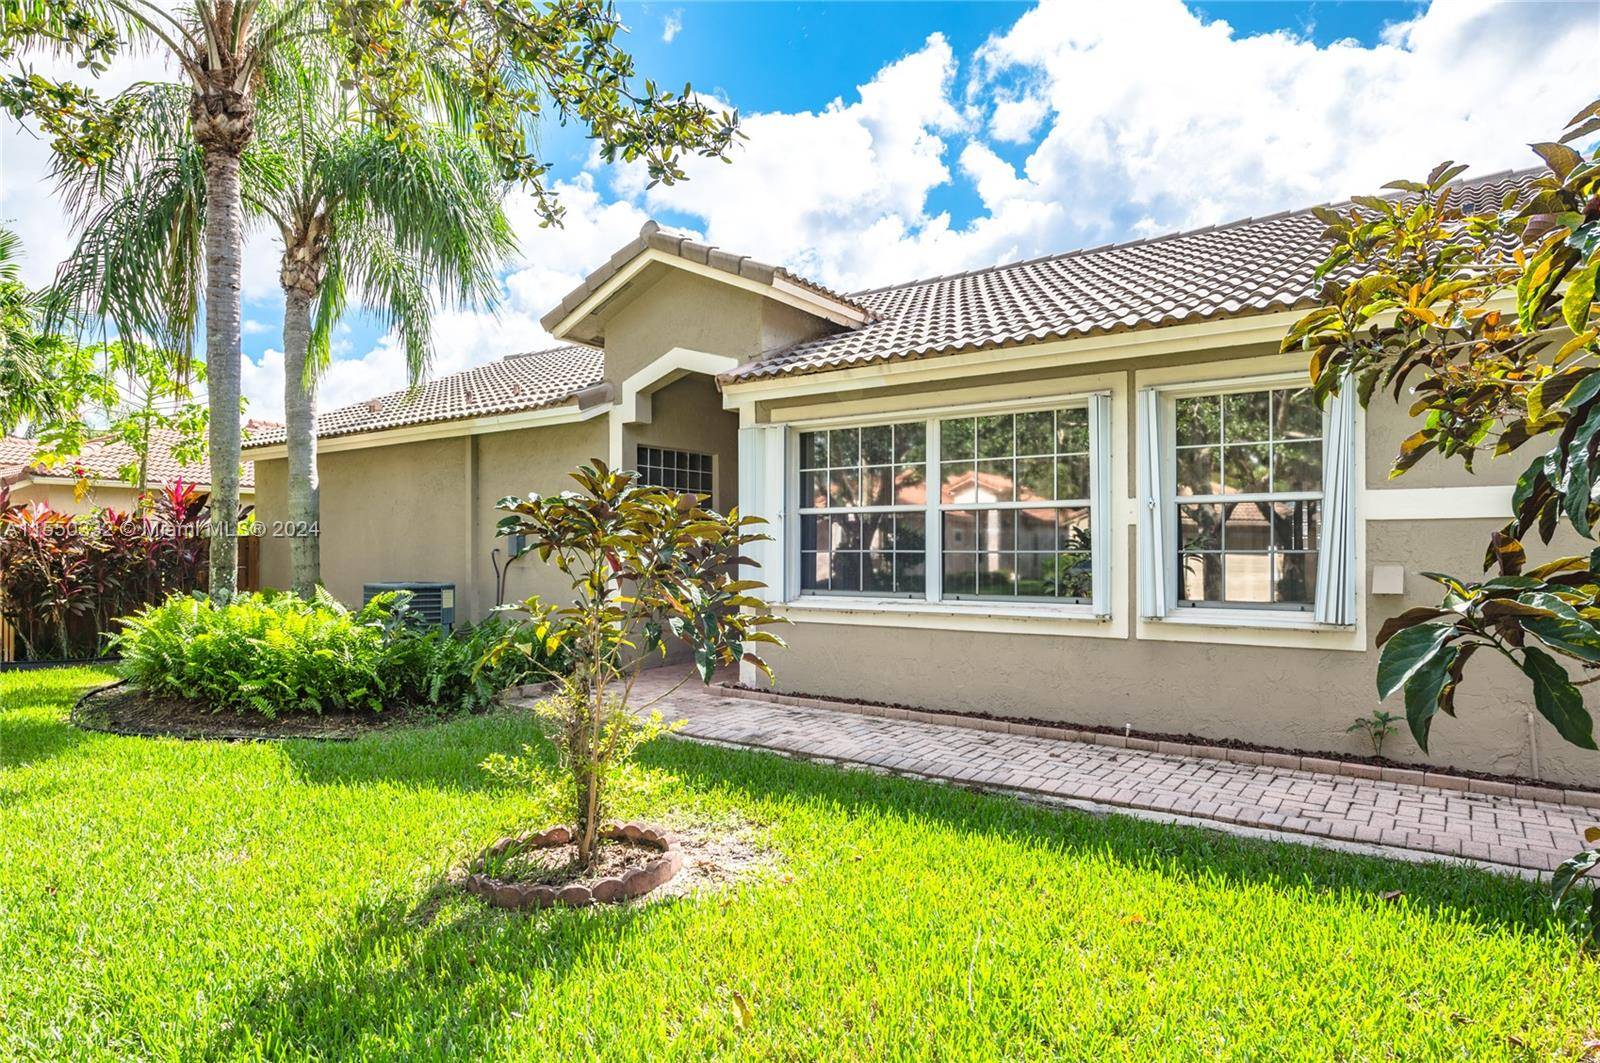 Welcome to your dream home in Weston !